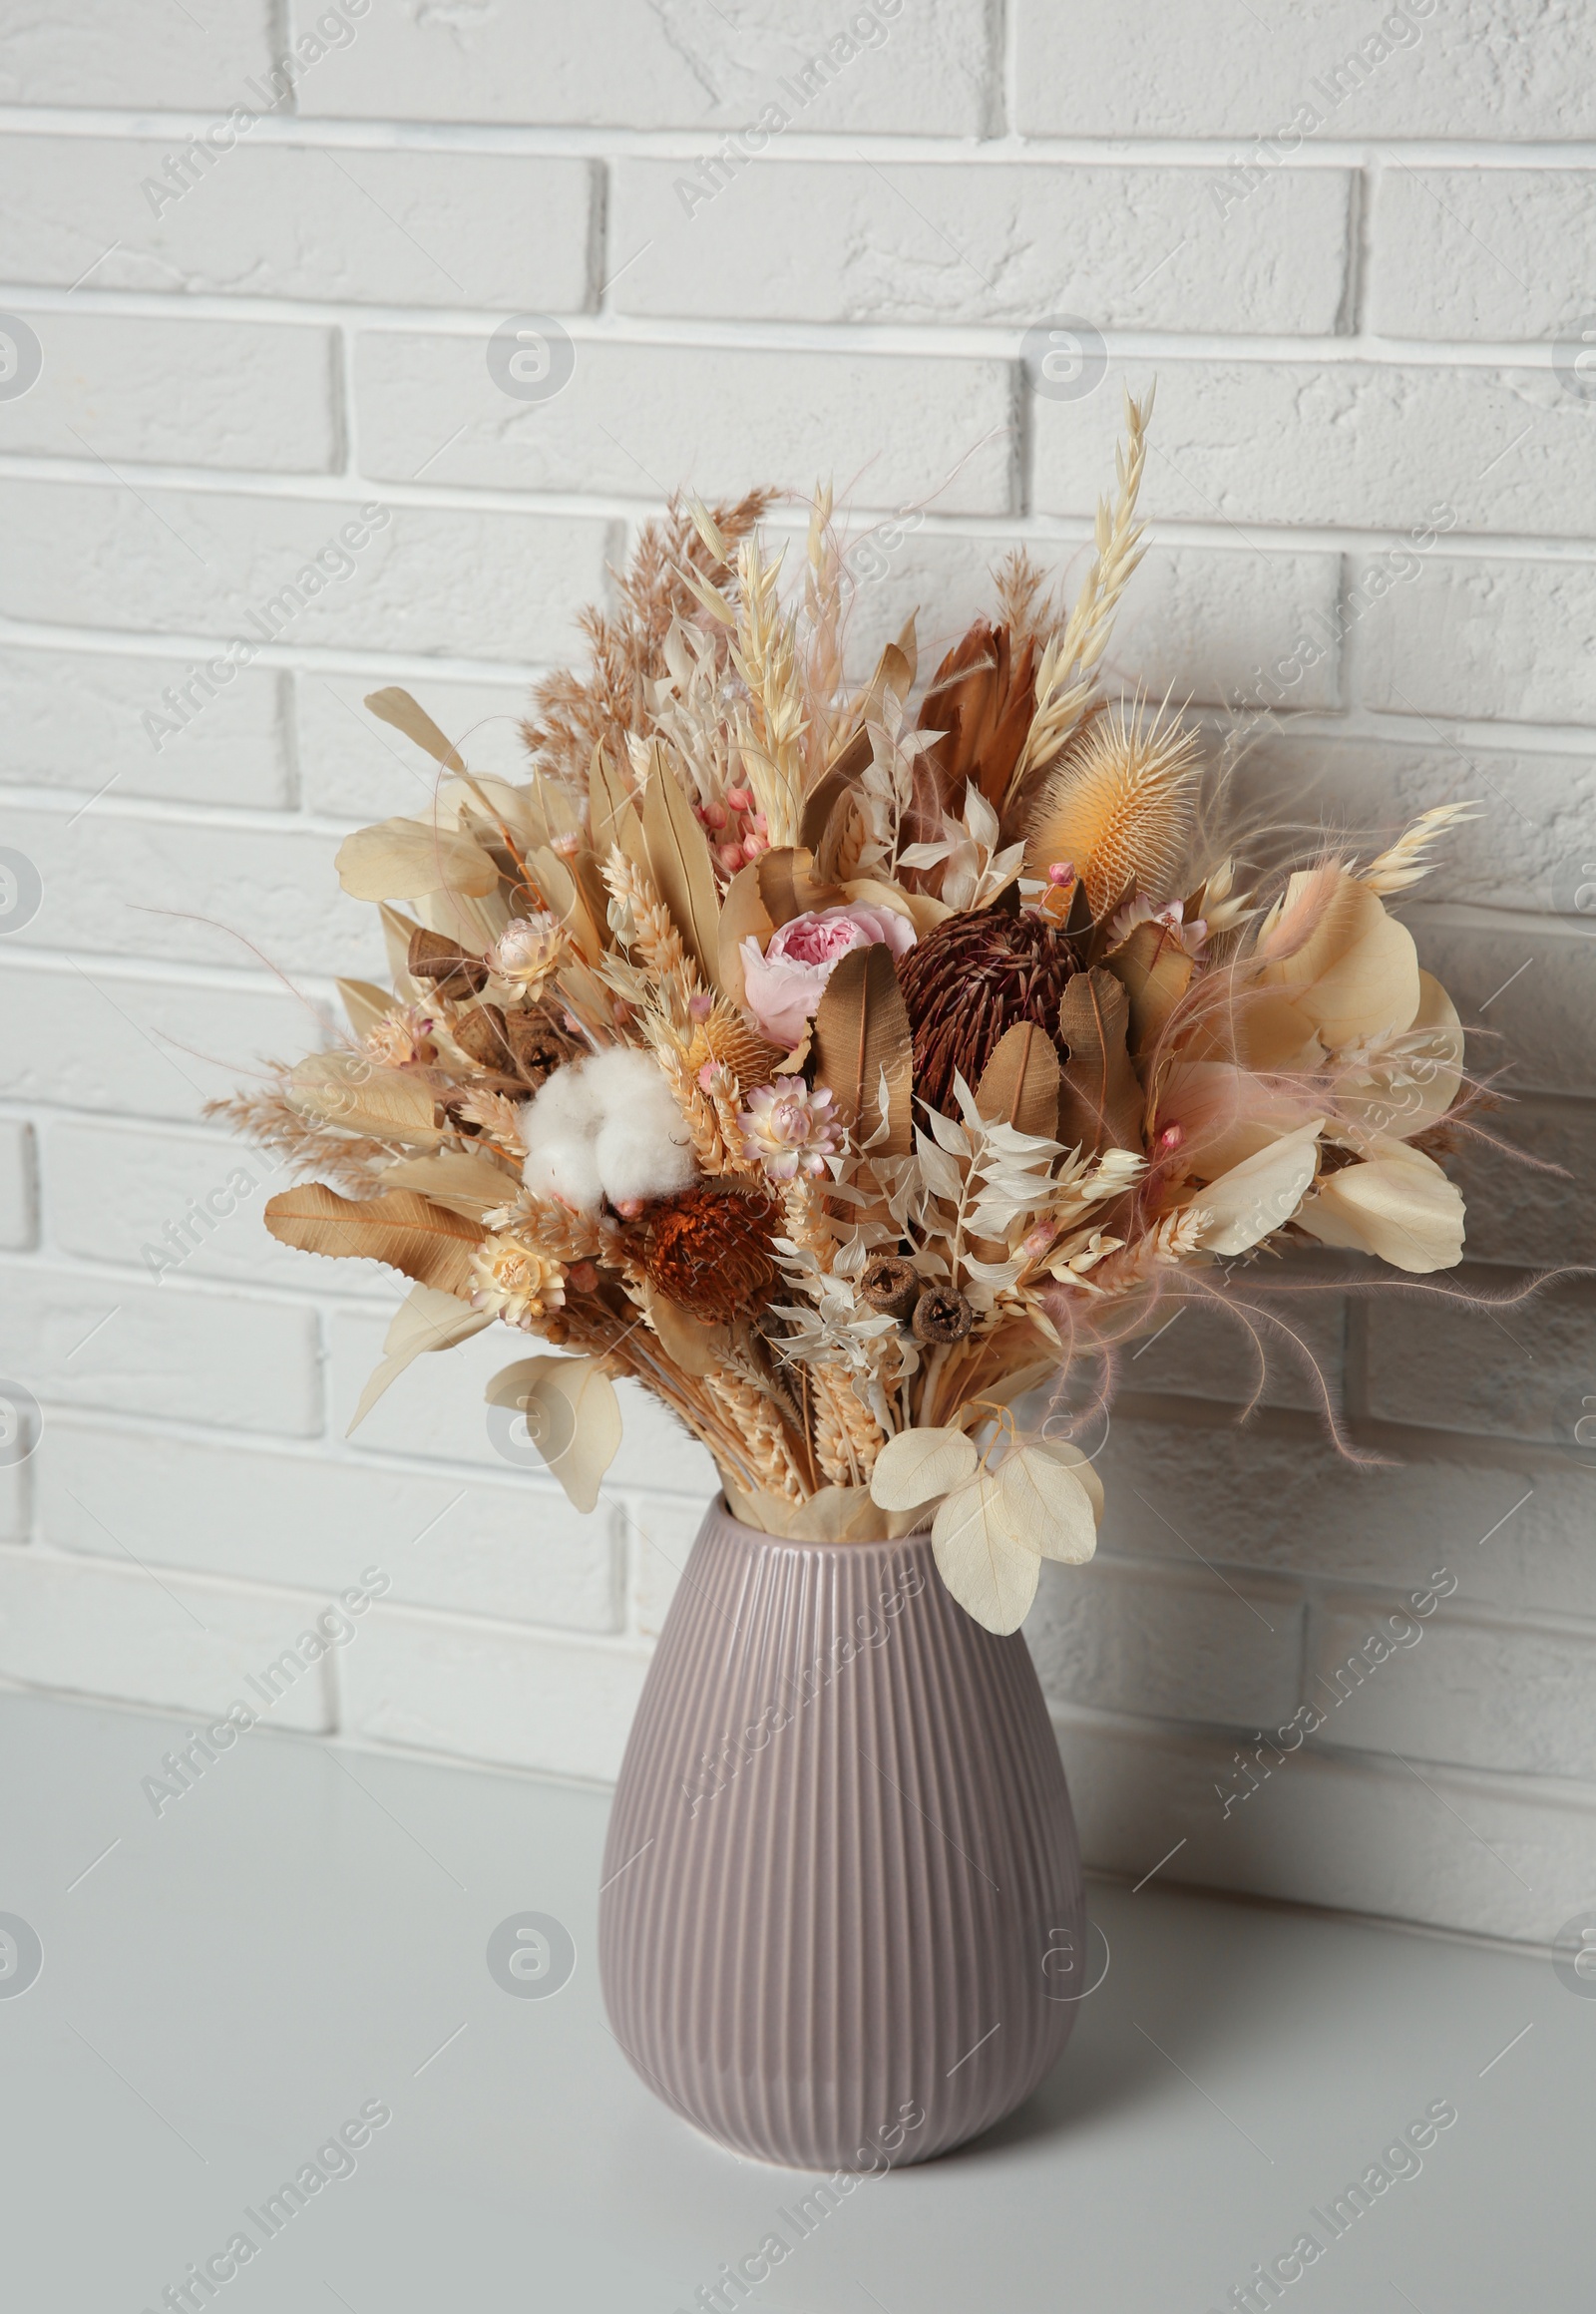 Photo of Beautiful dried flower bouquet in ceramic vase on table near white brick wall